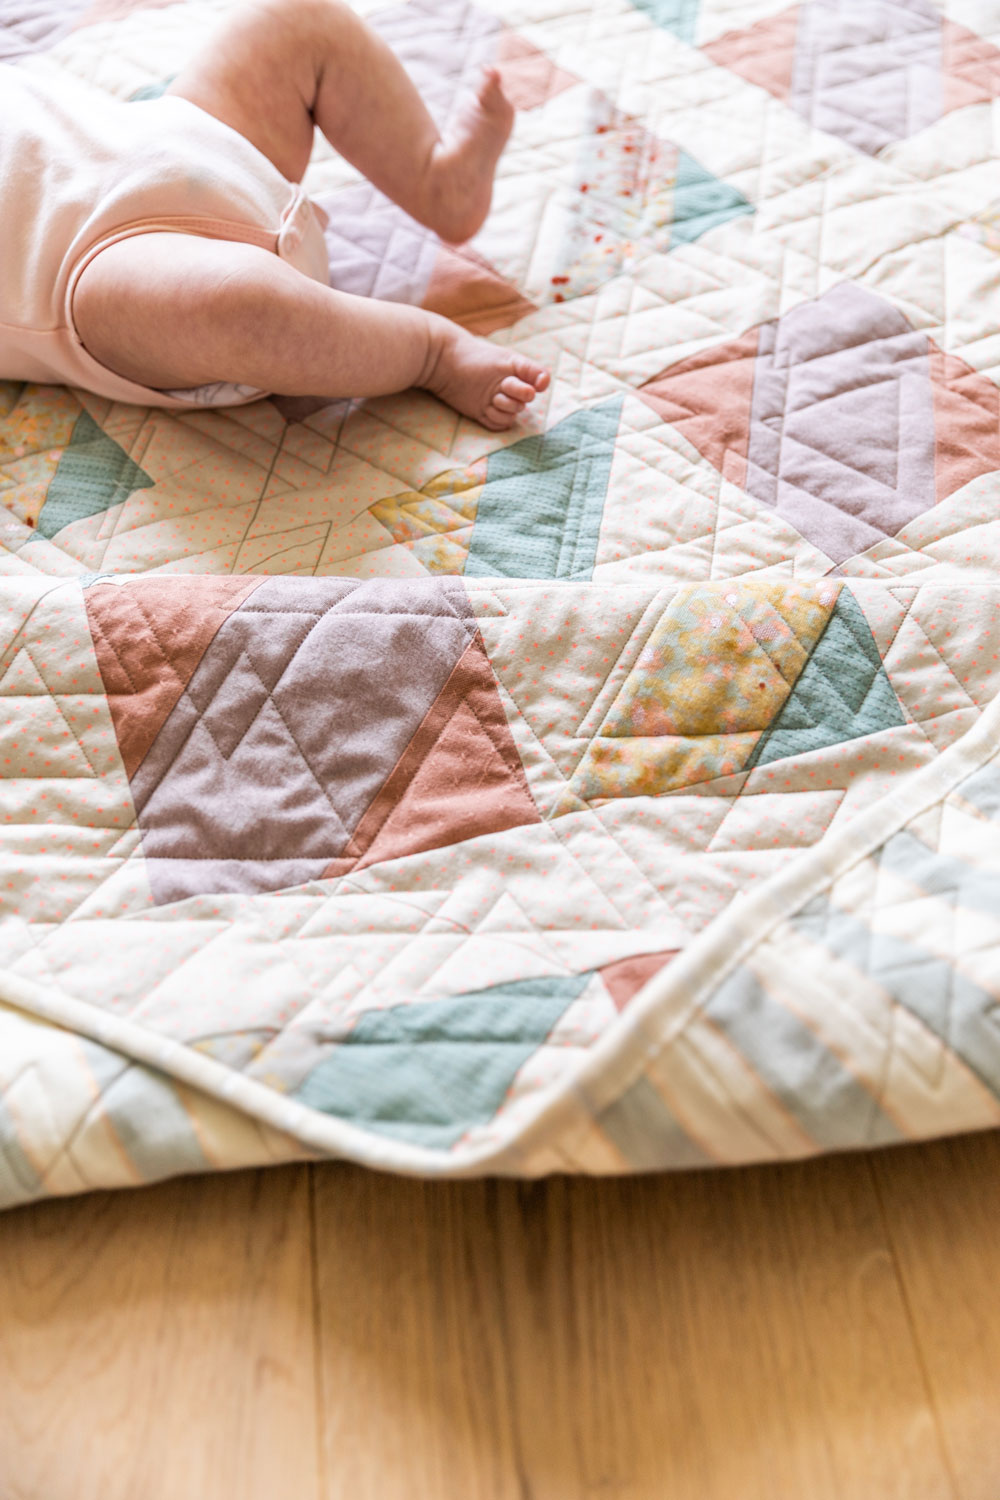 The New Horizons quilt pattern uses large quilt blocks, making it the perfect quilt pattern for double gauze! suzyquilts.com #babyquilt #doublegauze